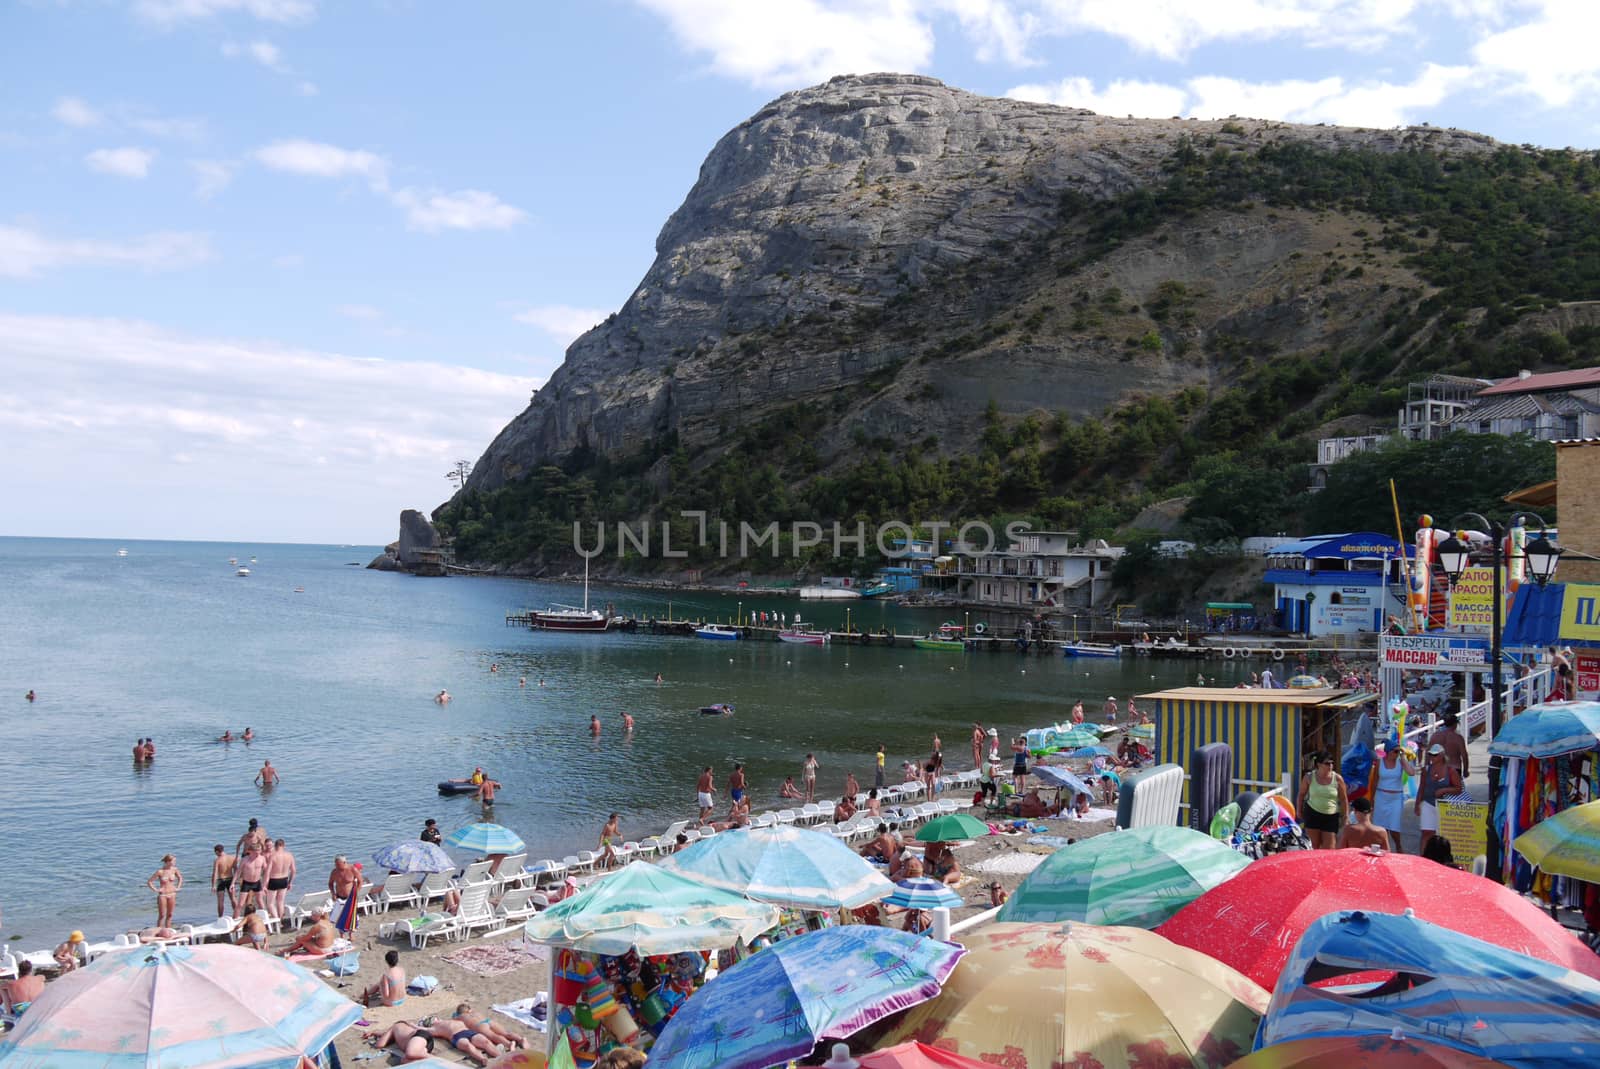 A sandy beach and a mountain creating a shadow over it and the sea. An ideal place for a curret